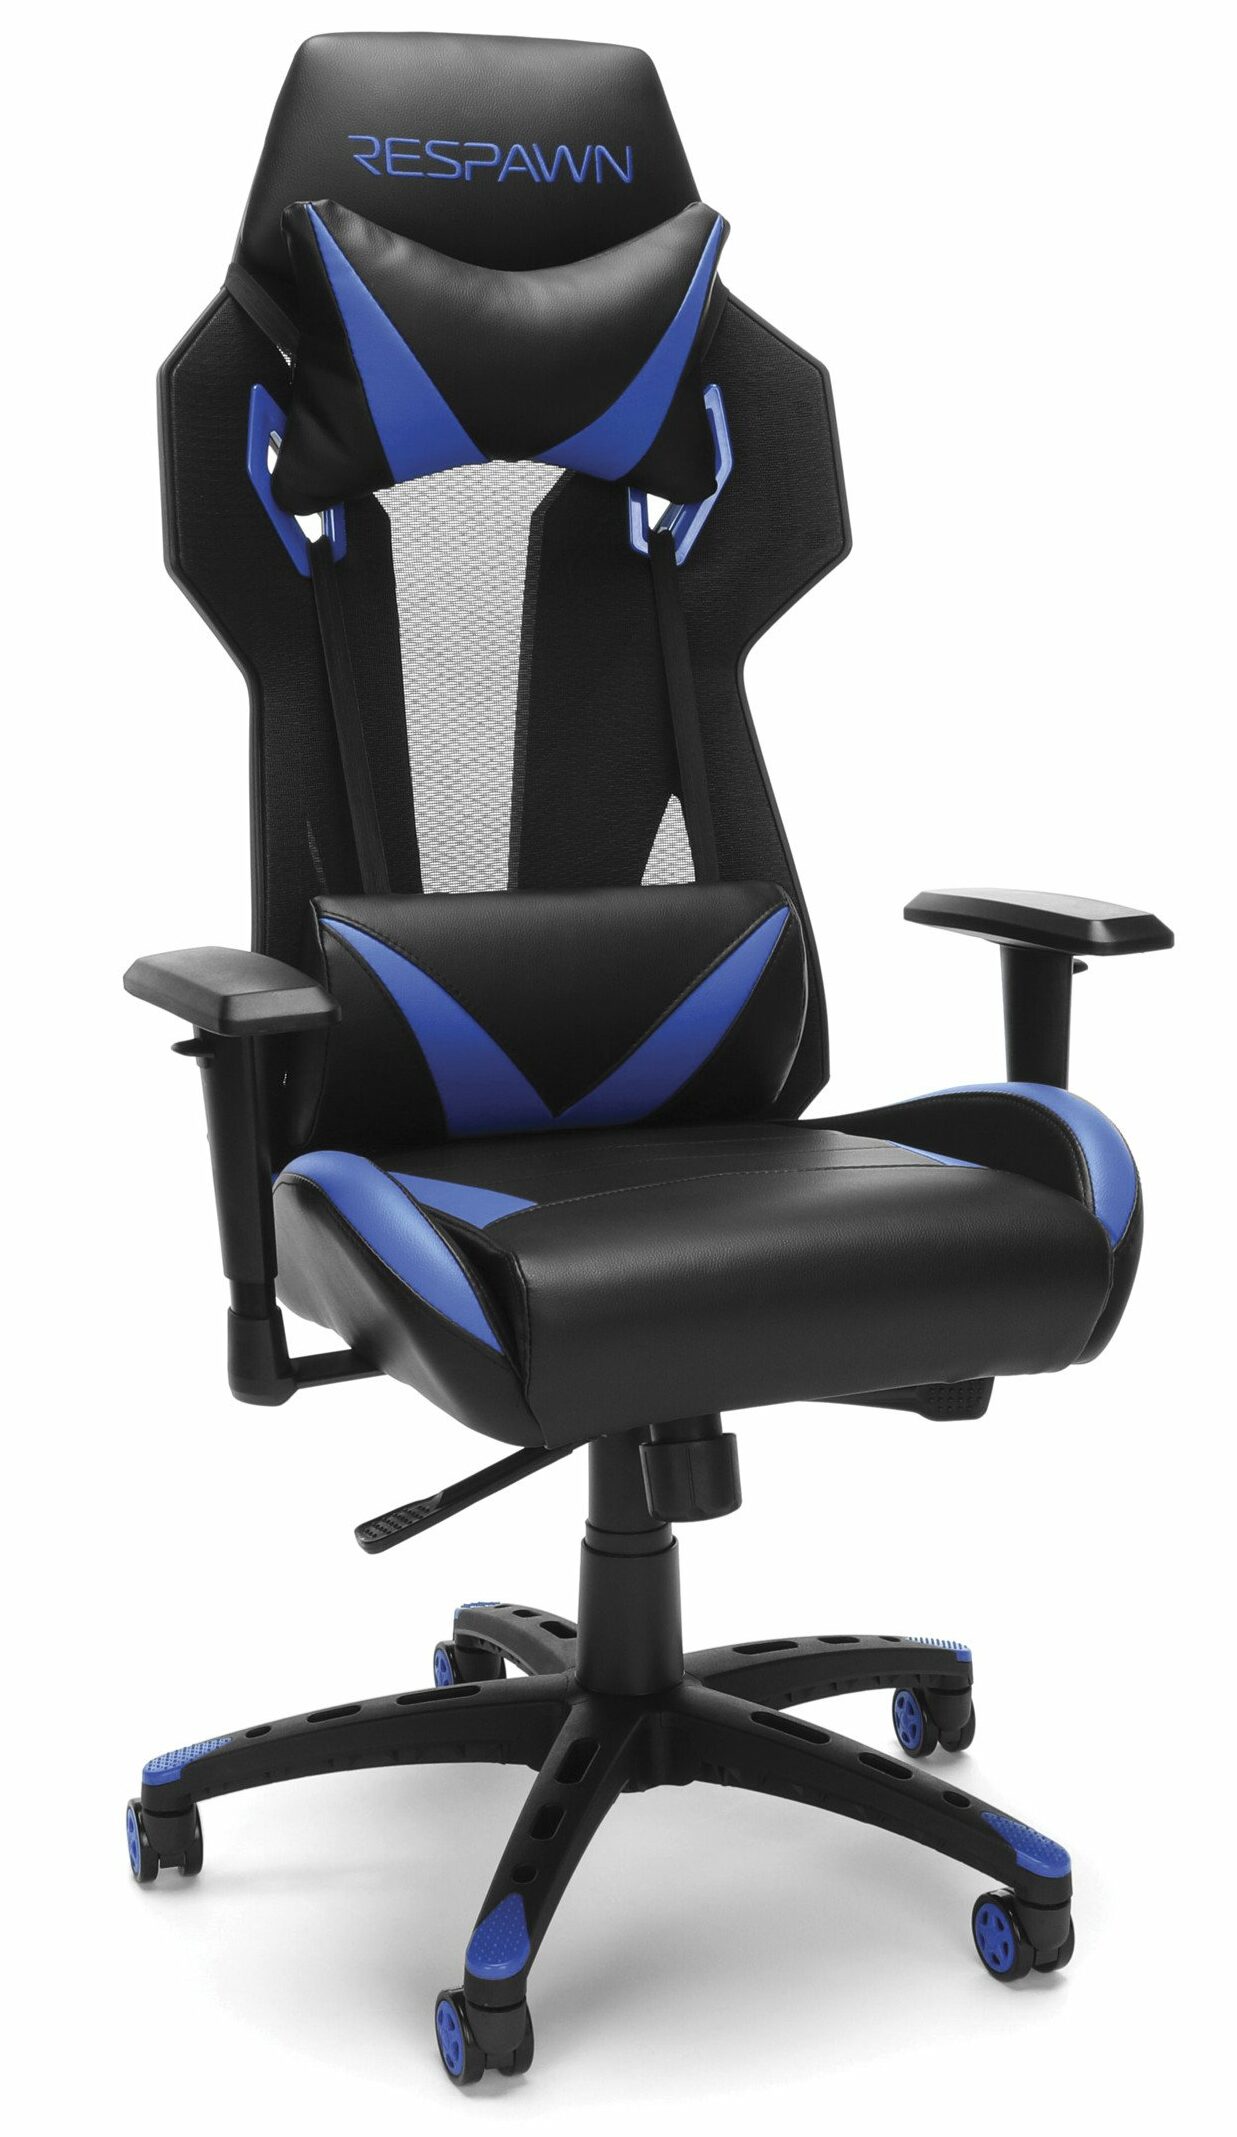 RESPAWN 205 Racing Style Gaming Chair